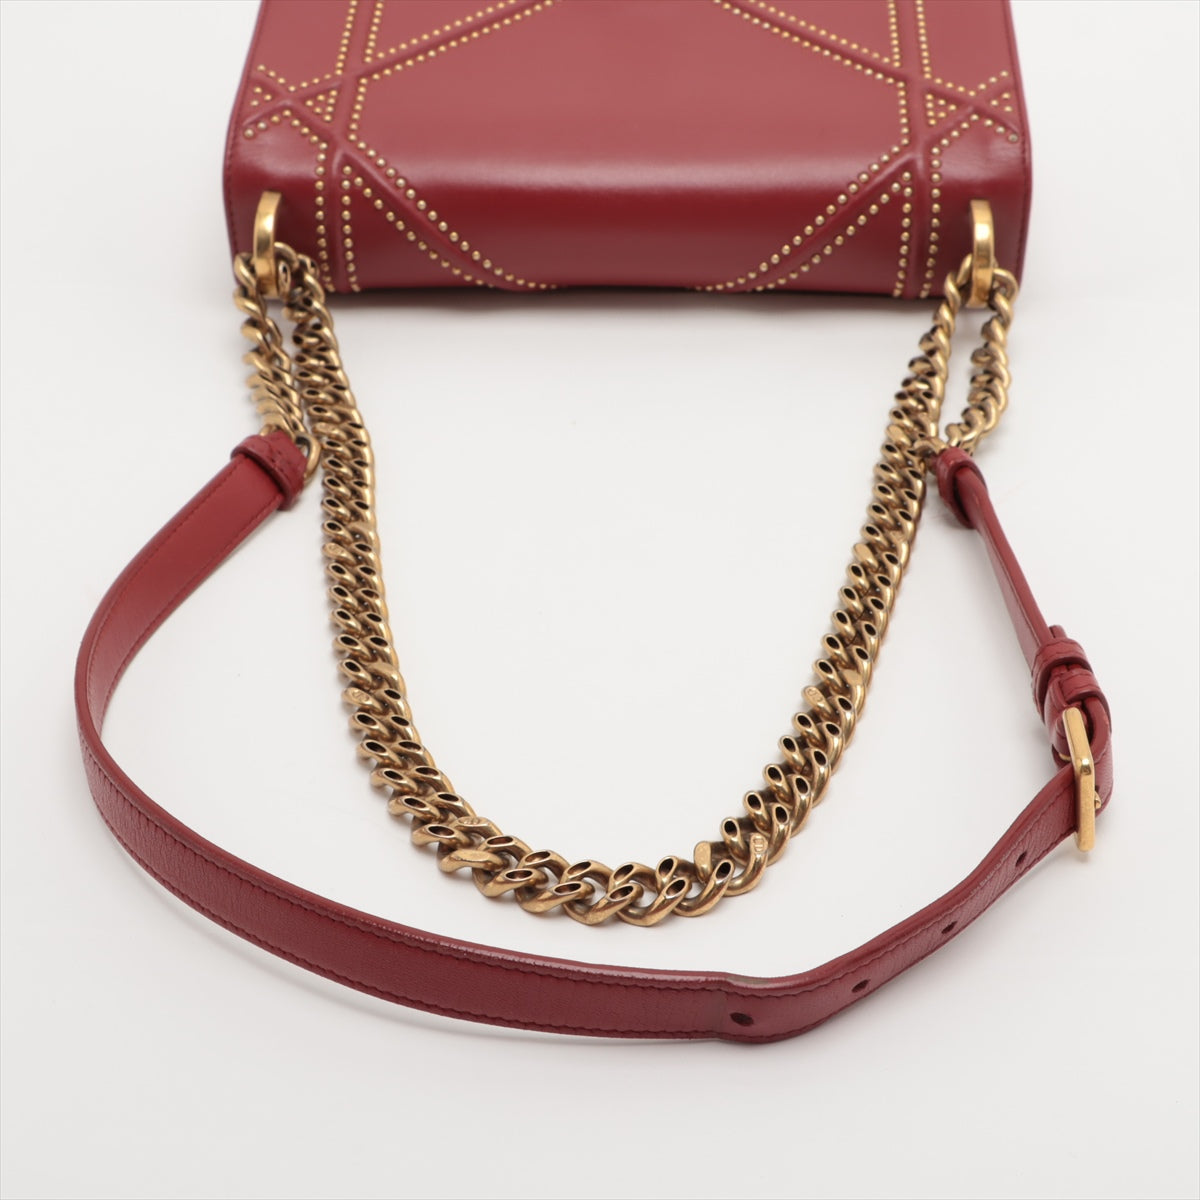 Christian Dior Diorama leather x studs Chain shoulder bag Red